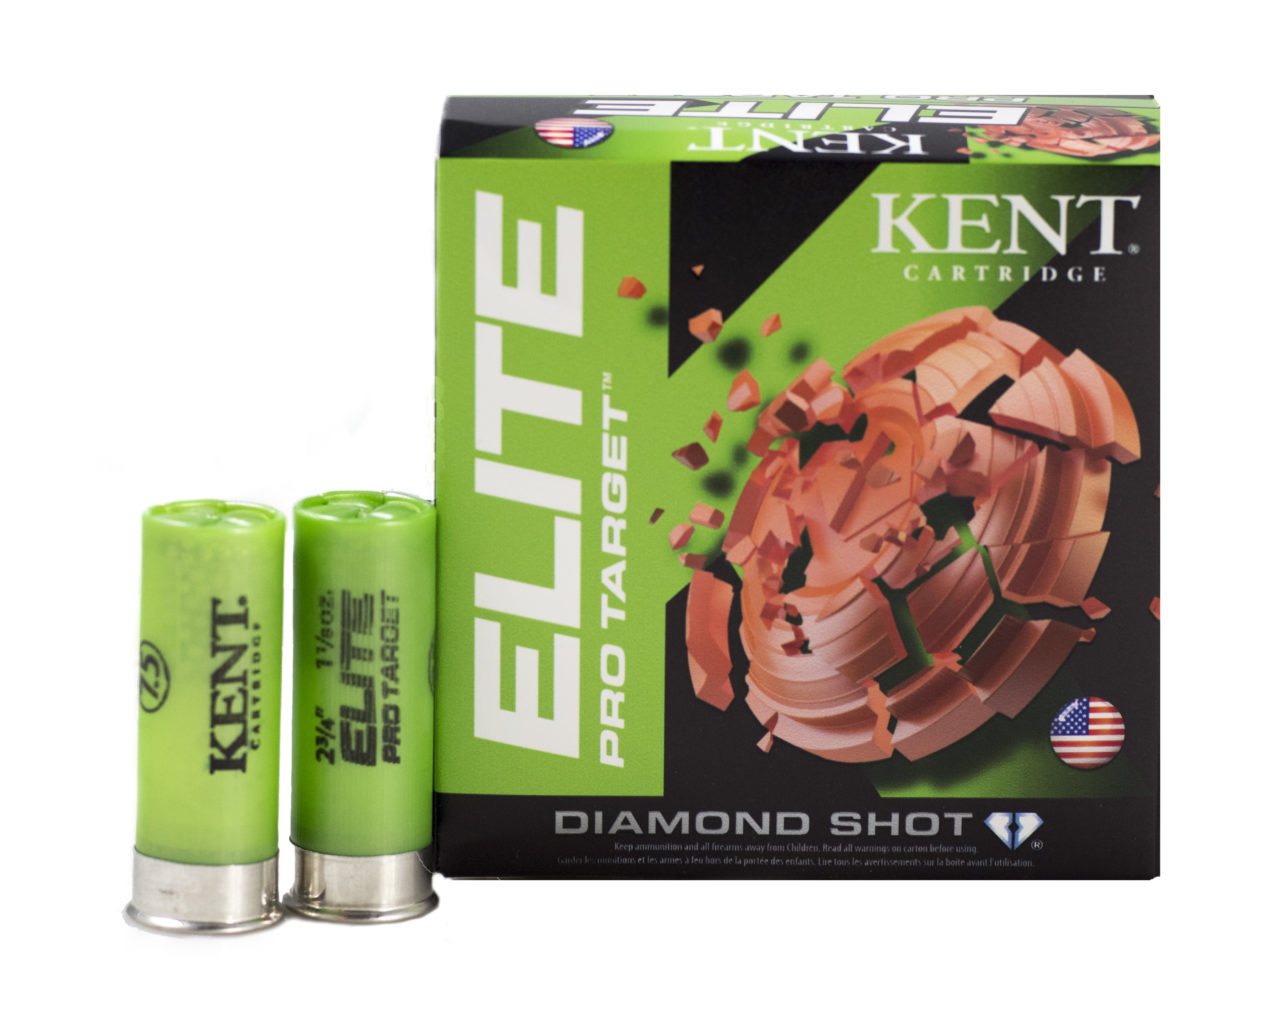 Kent® Cartridge Introduces the New Elite Pro Target™ Line for 2018